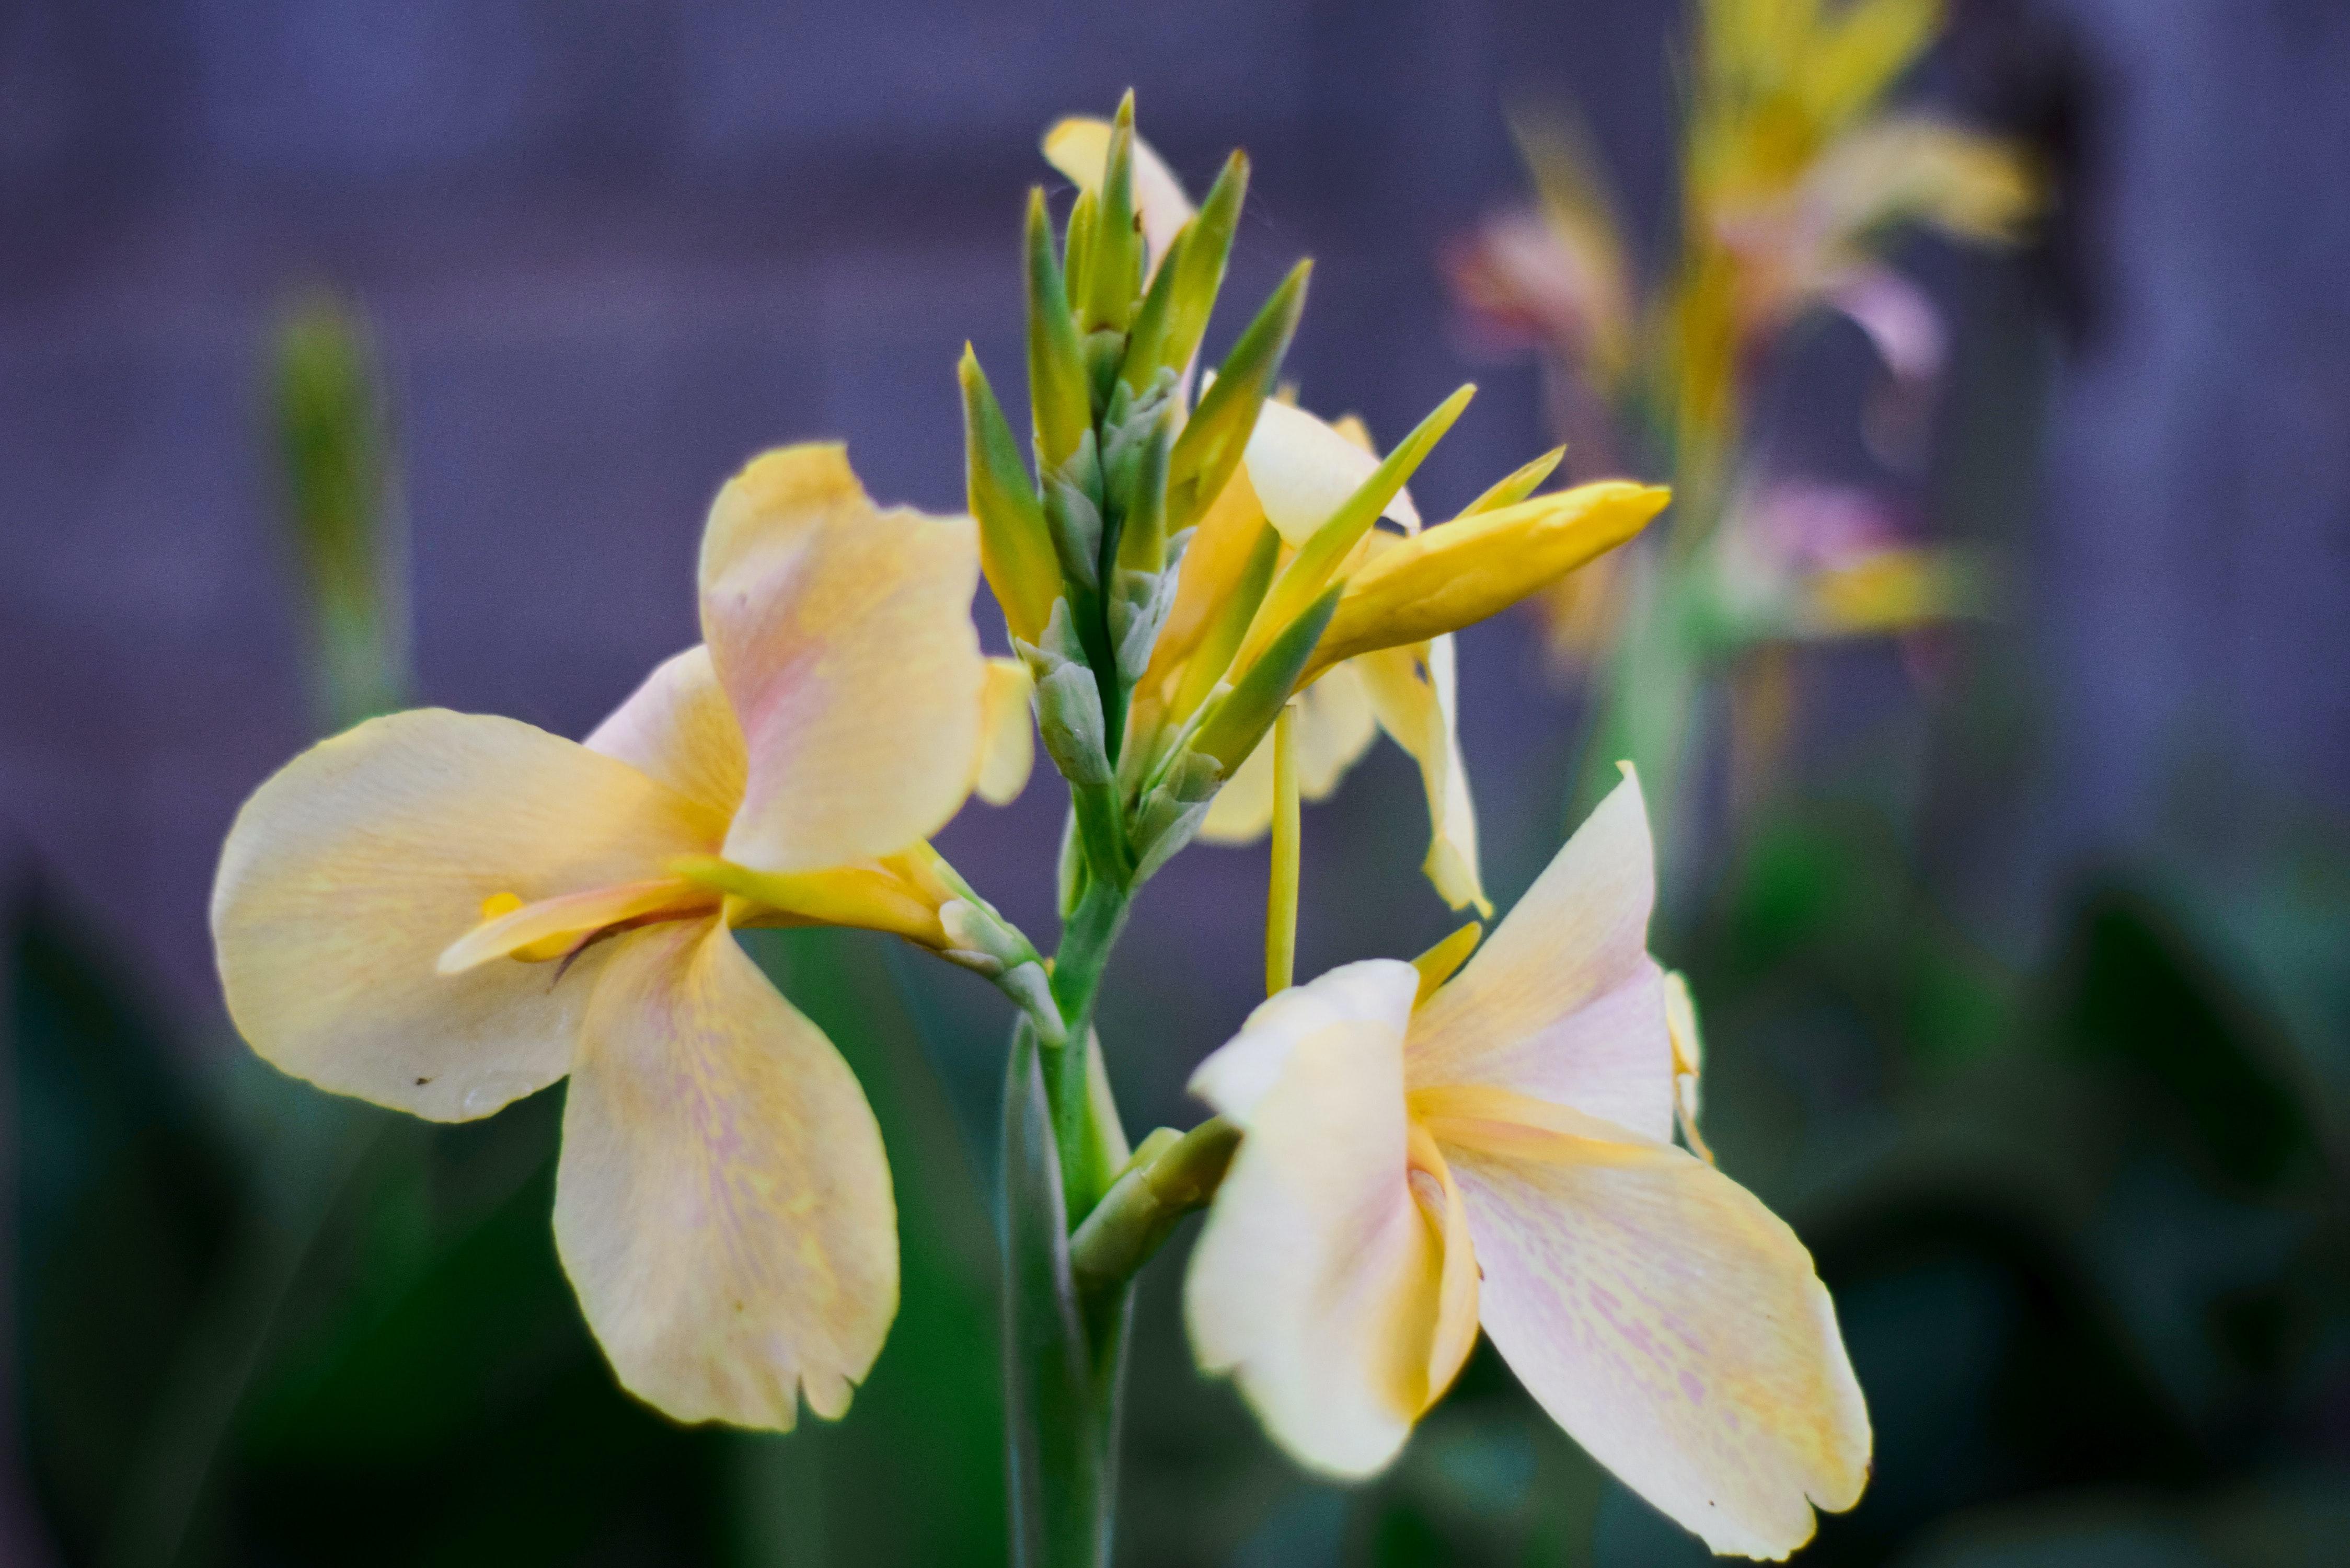 Canna 'Primrose Yellow' - Canna (Shipping begins March 2021) from Leo Berbee Bulb Company